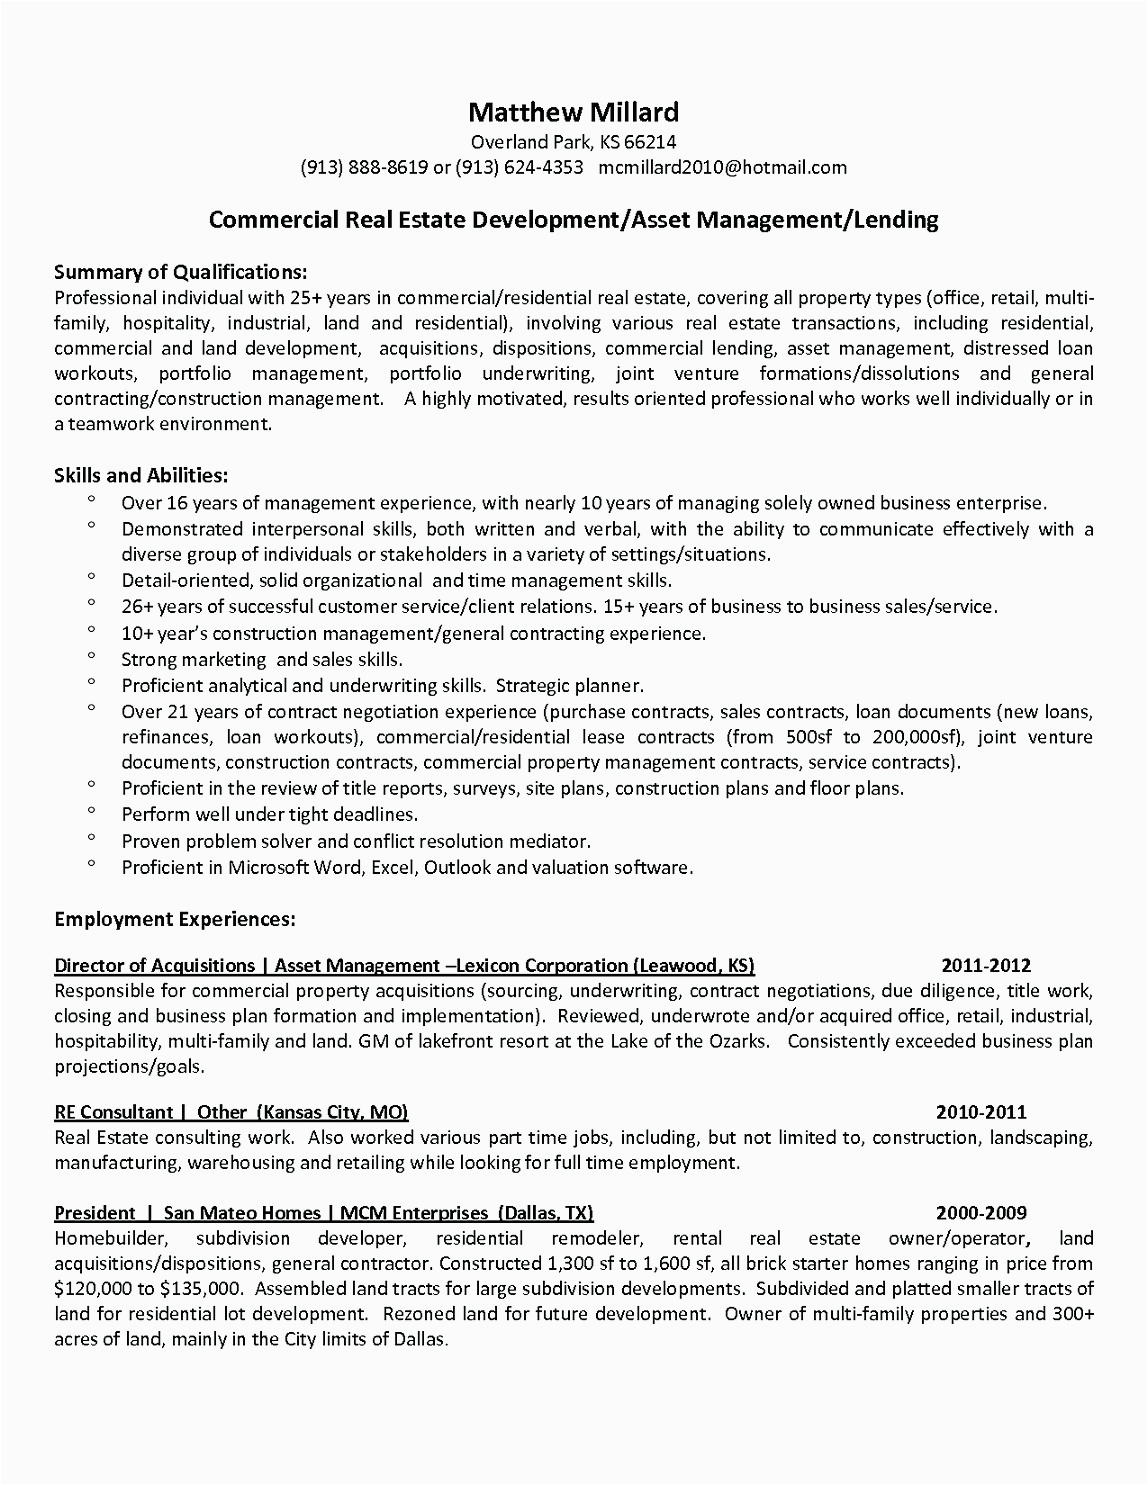 Sample Resume for Commercial Property Manager Mercial Property Manager Resume